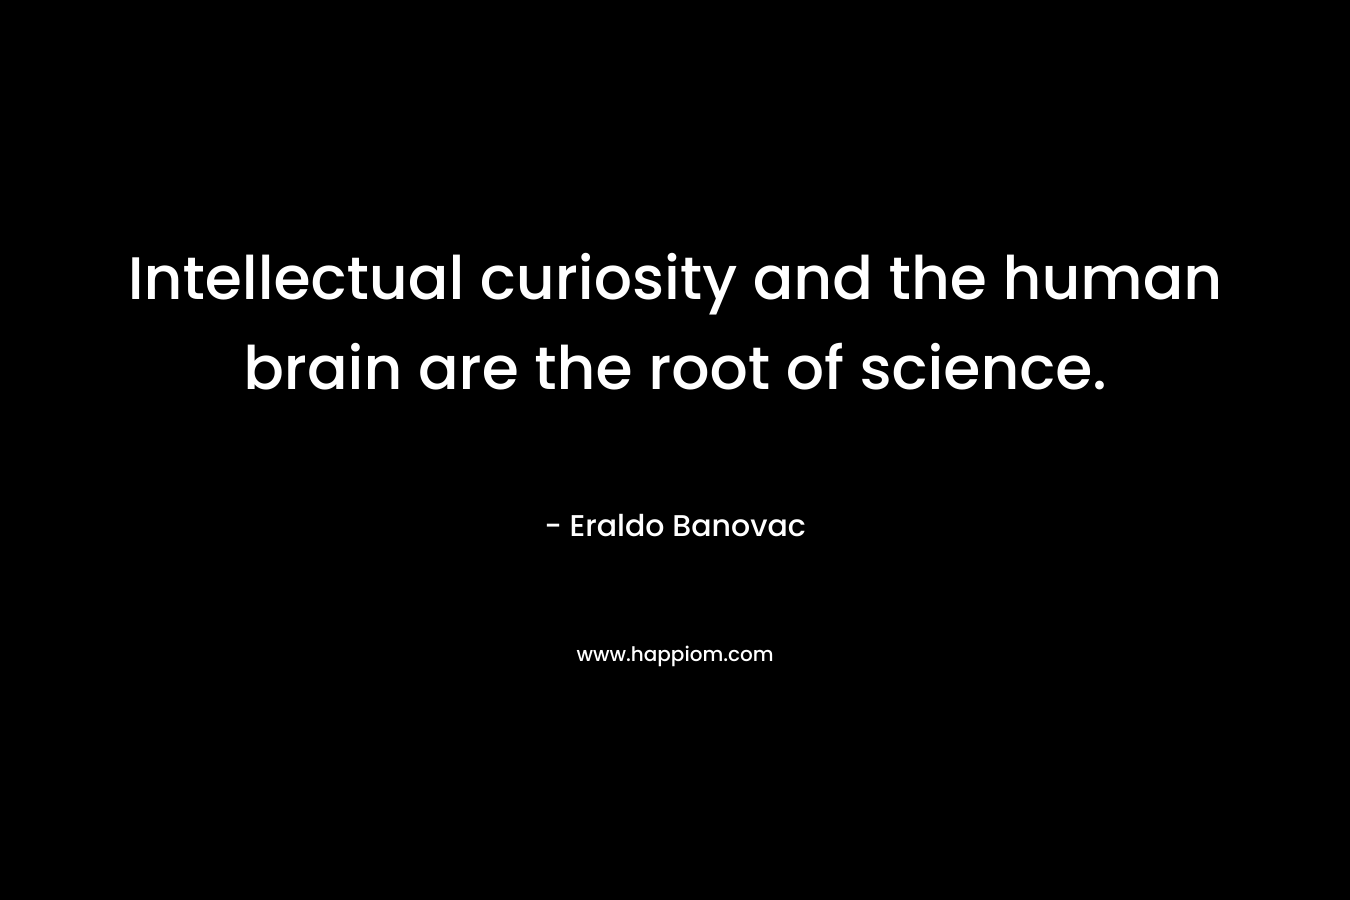 Intellectual curiosity and the human brain are the root of science.